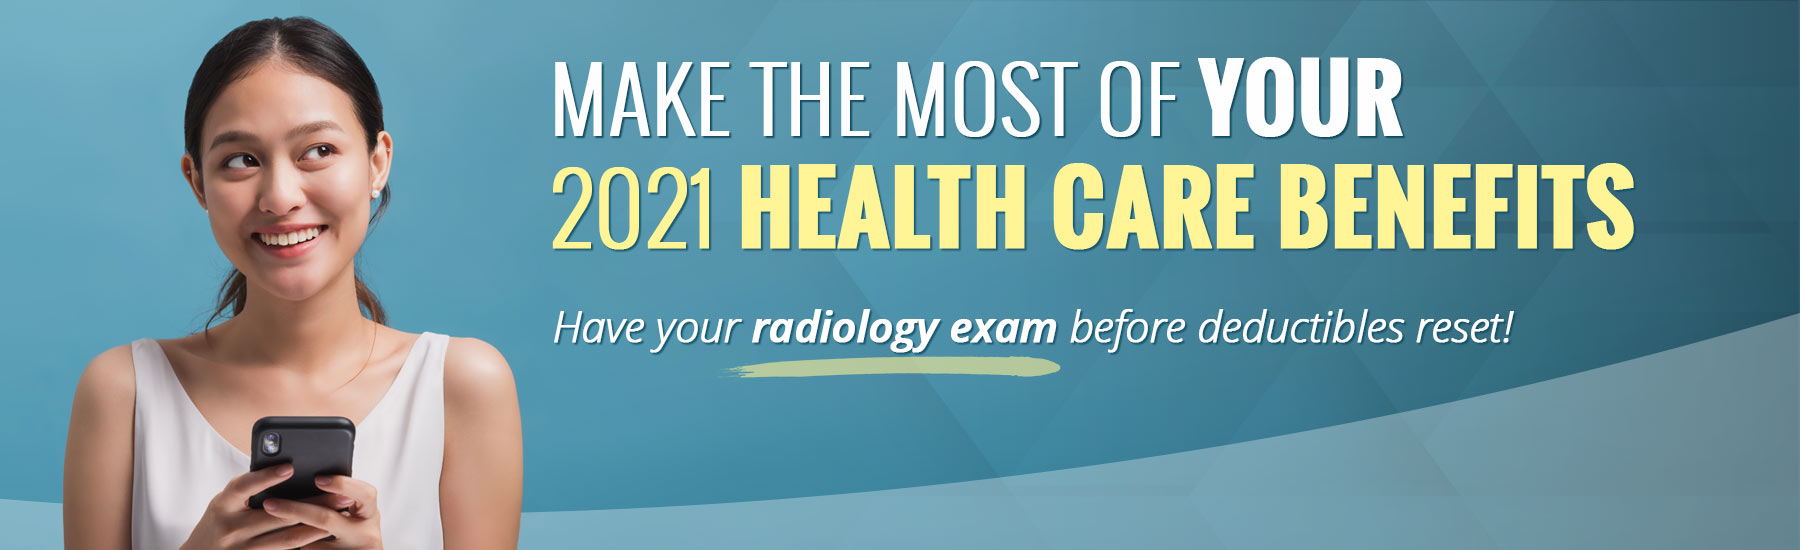 Make the Most of Your 2021 Health Care Benefits!